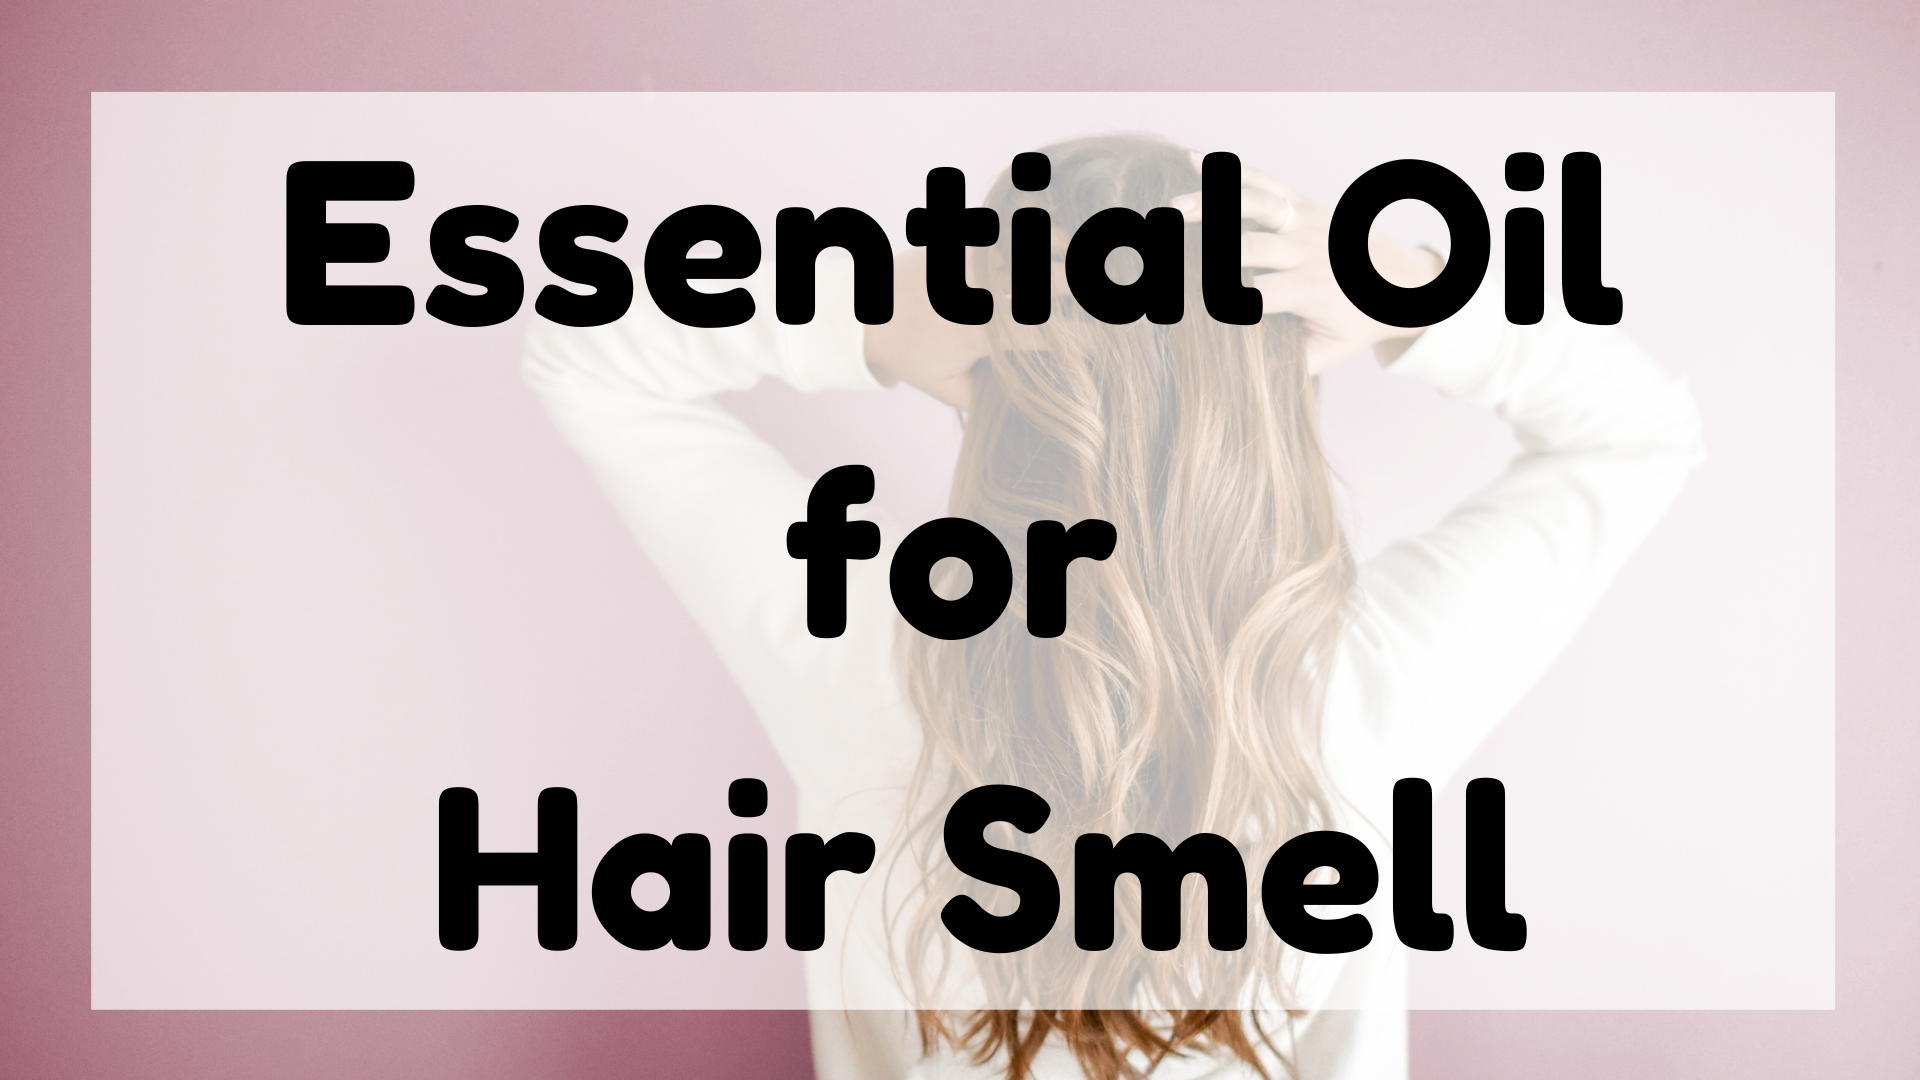 Essential Oil for Hair Smell featured image